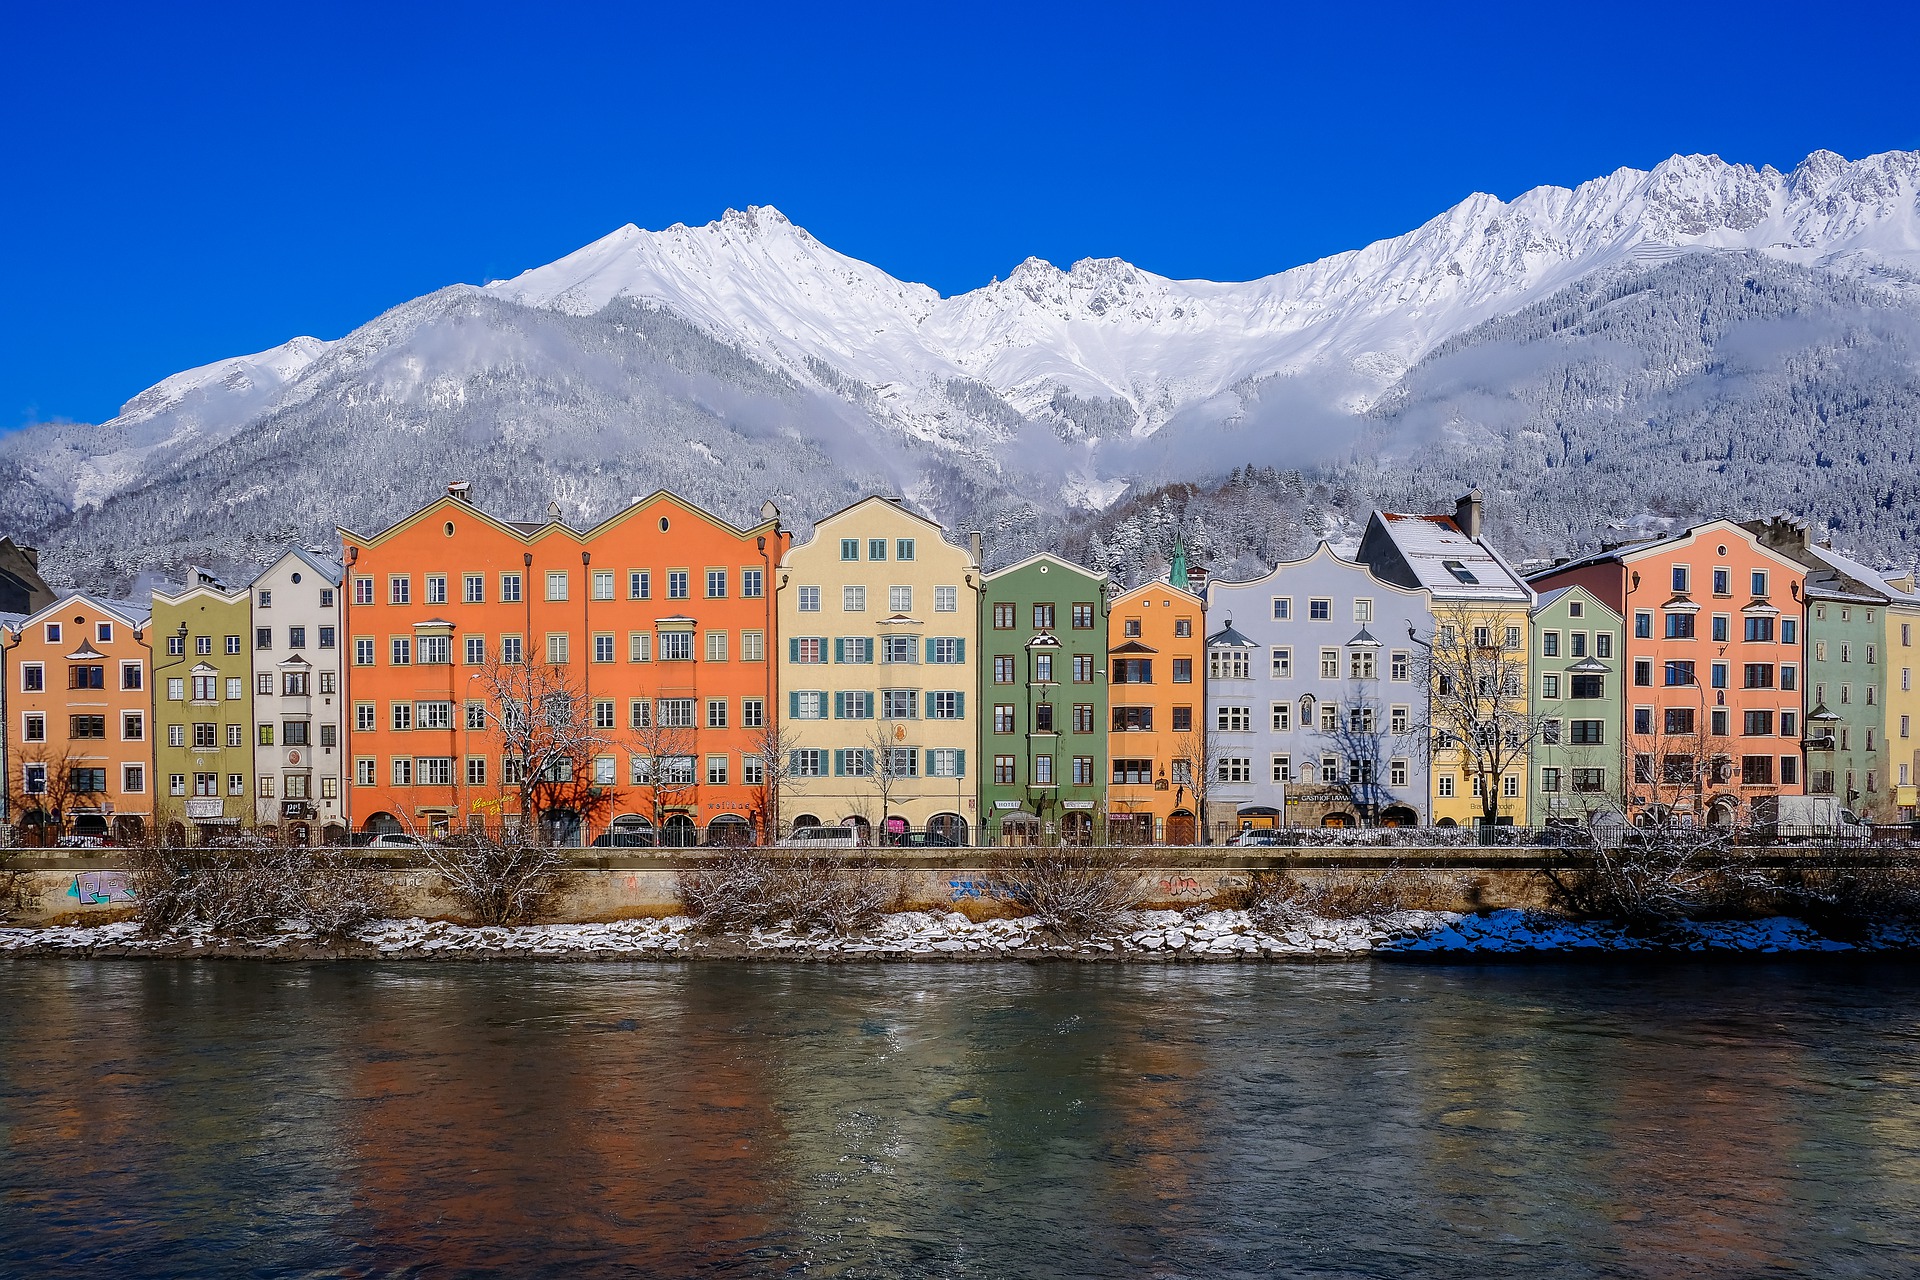 alndscape of buildings and mountains in Innsbruck, Austria